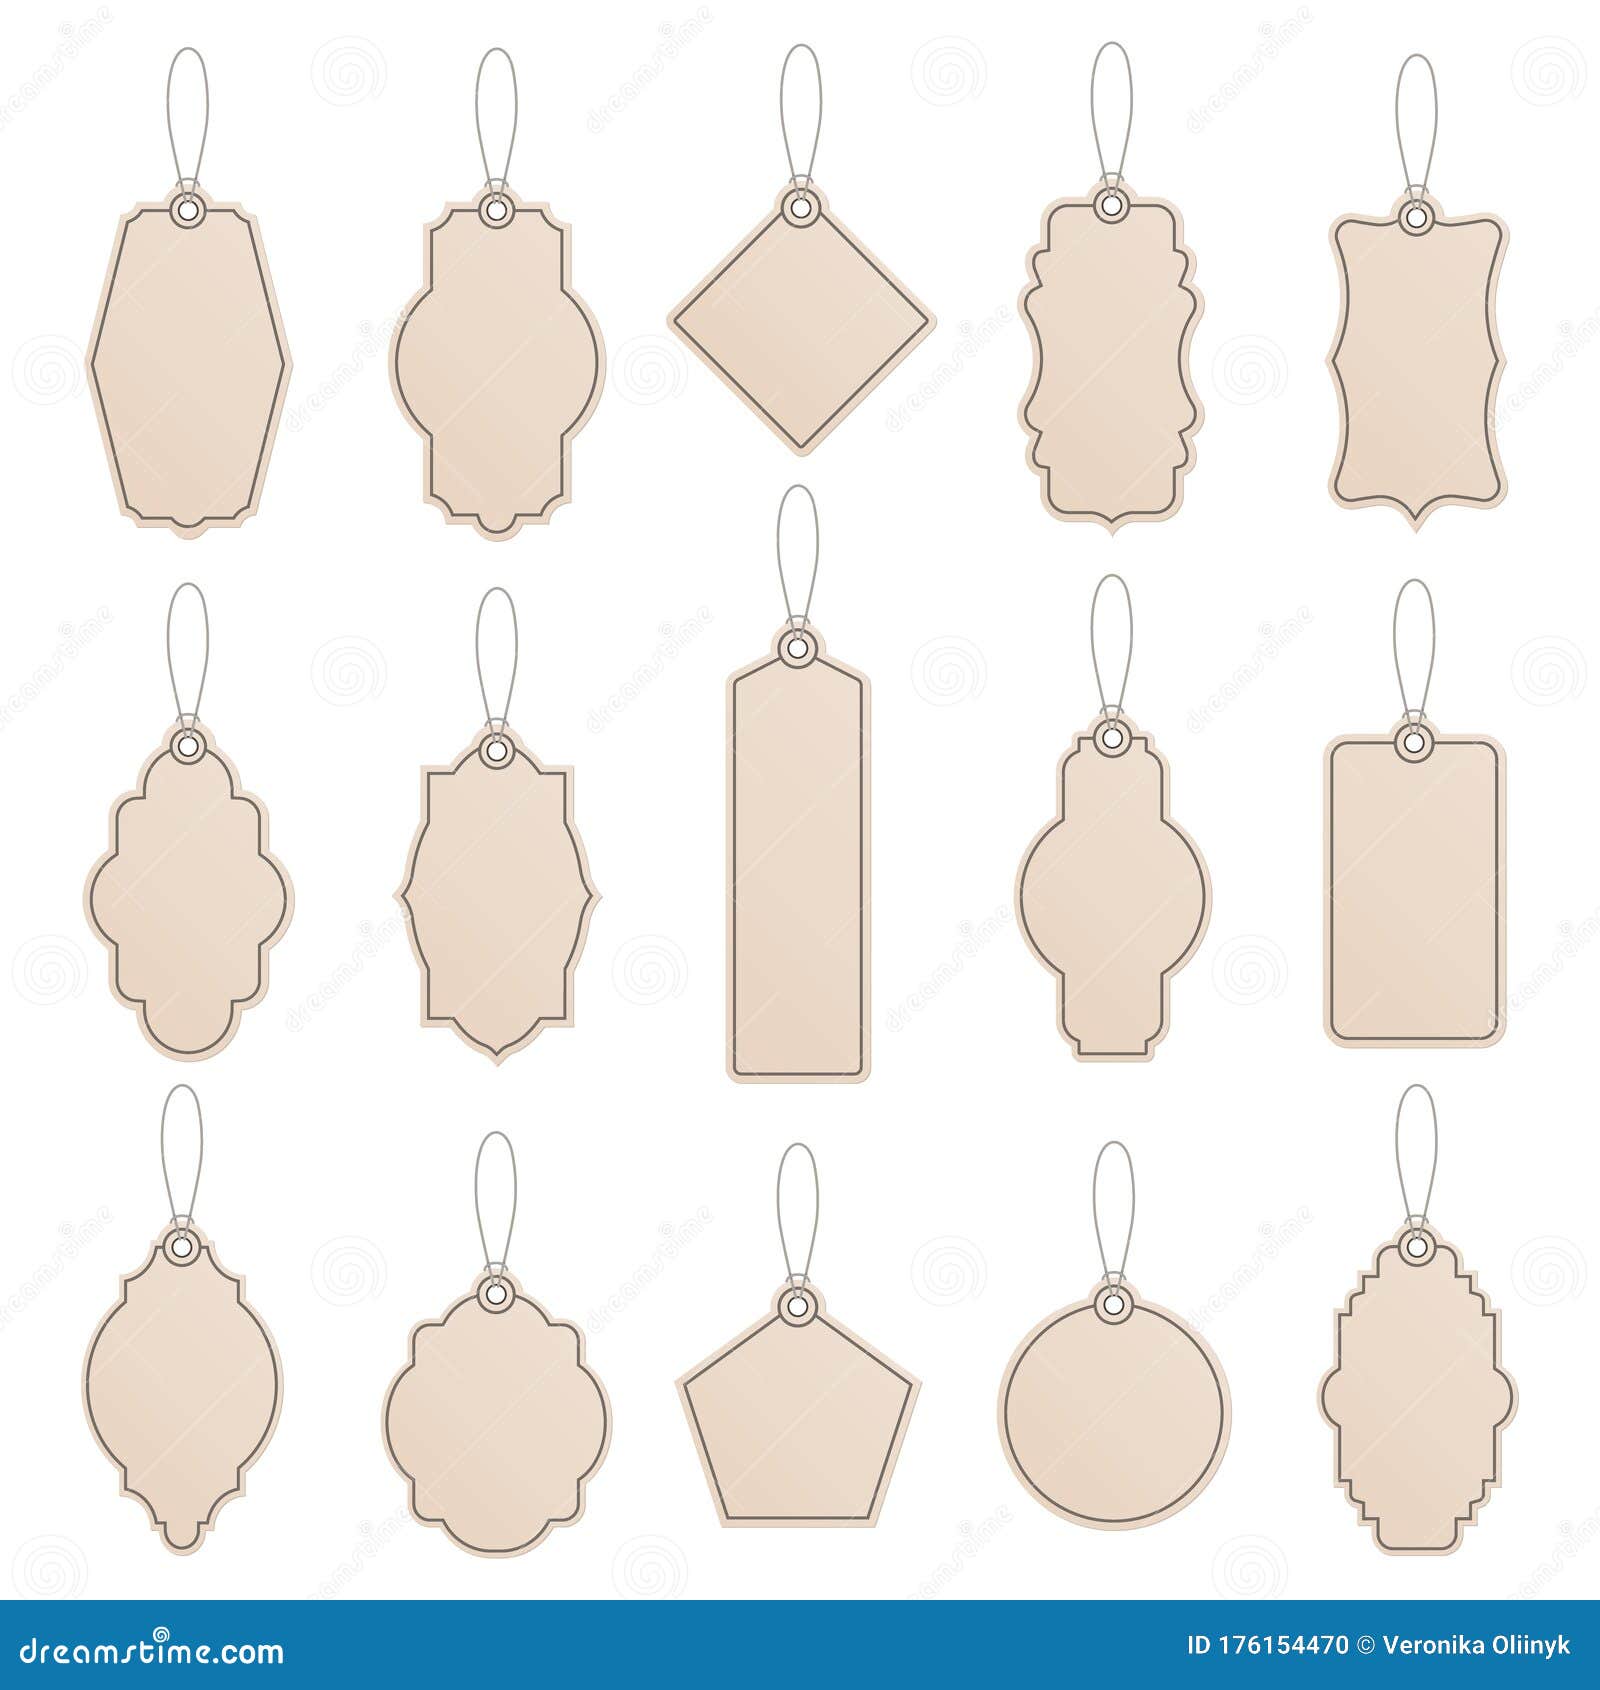 Label Template. Vintage Paper Tag Labels, Craft Price Tags, Shop Intended For Decorative Label Templates Free